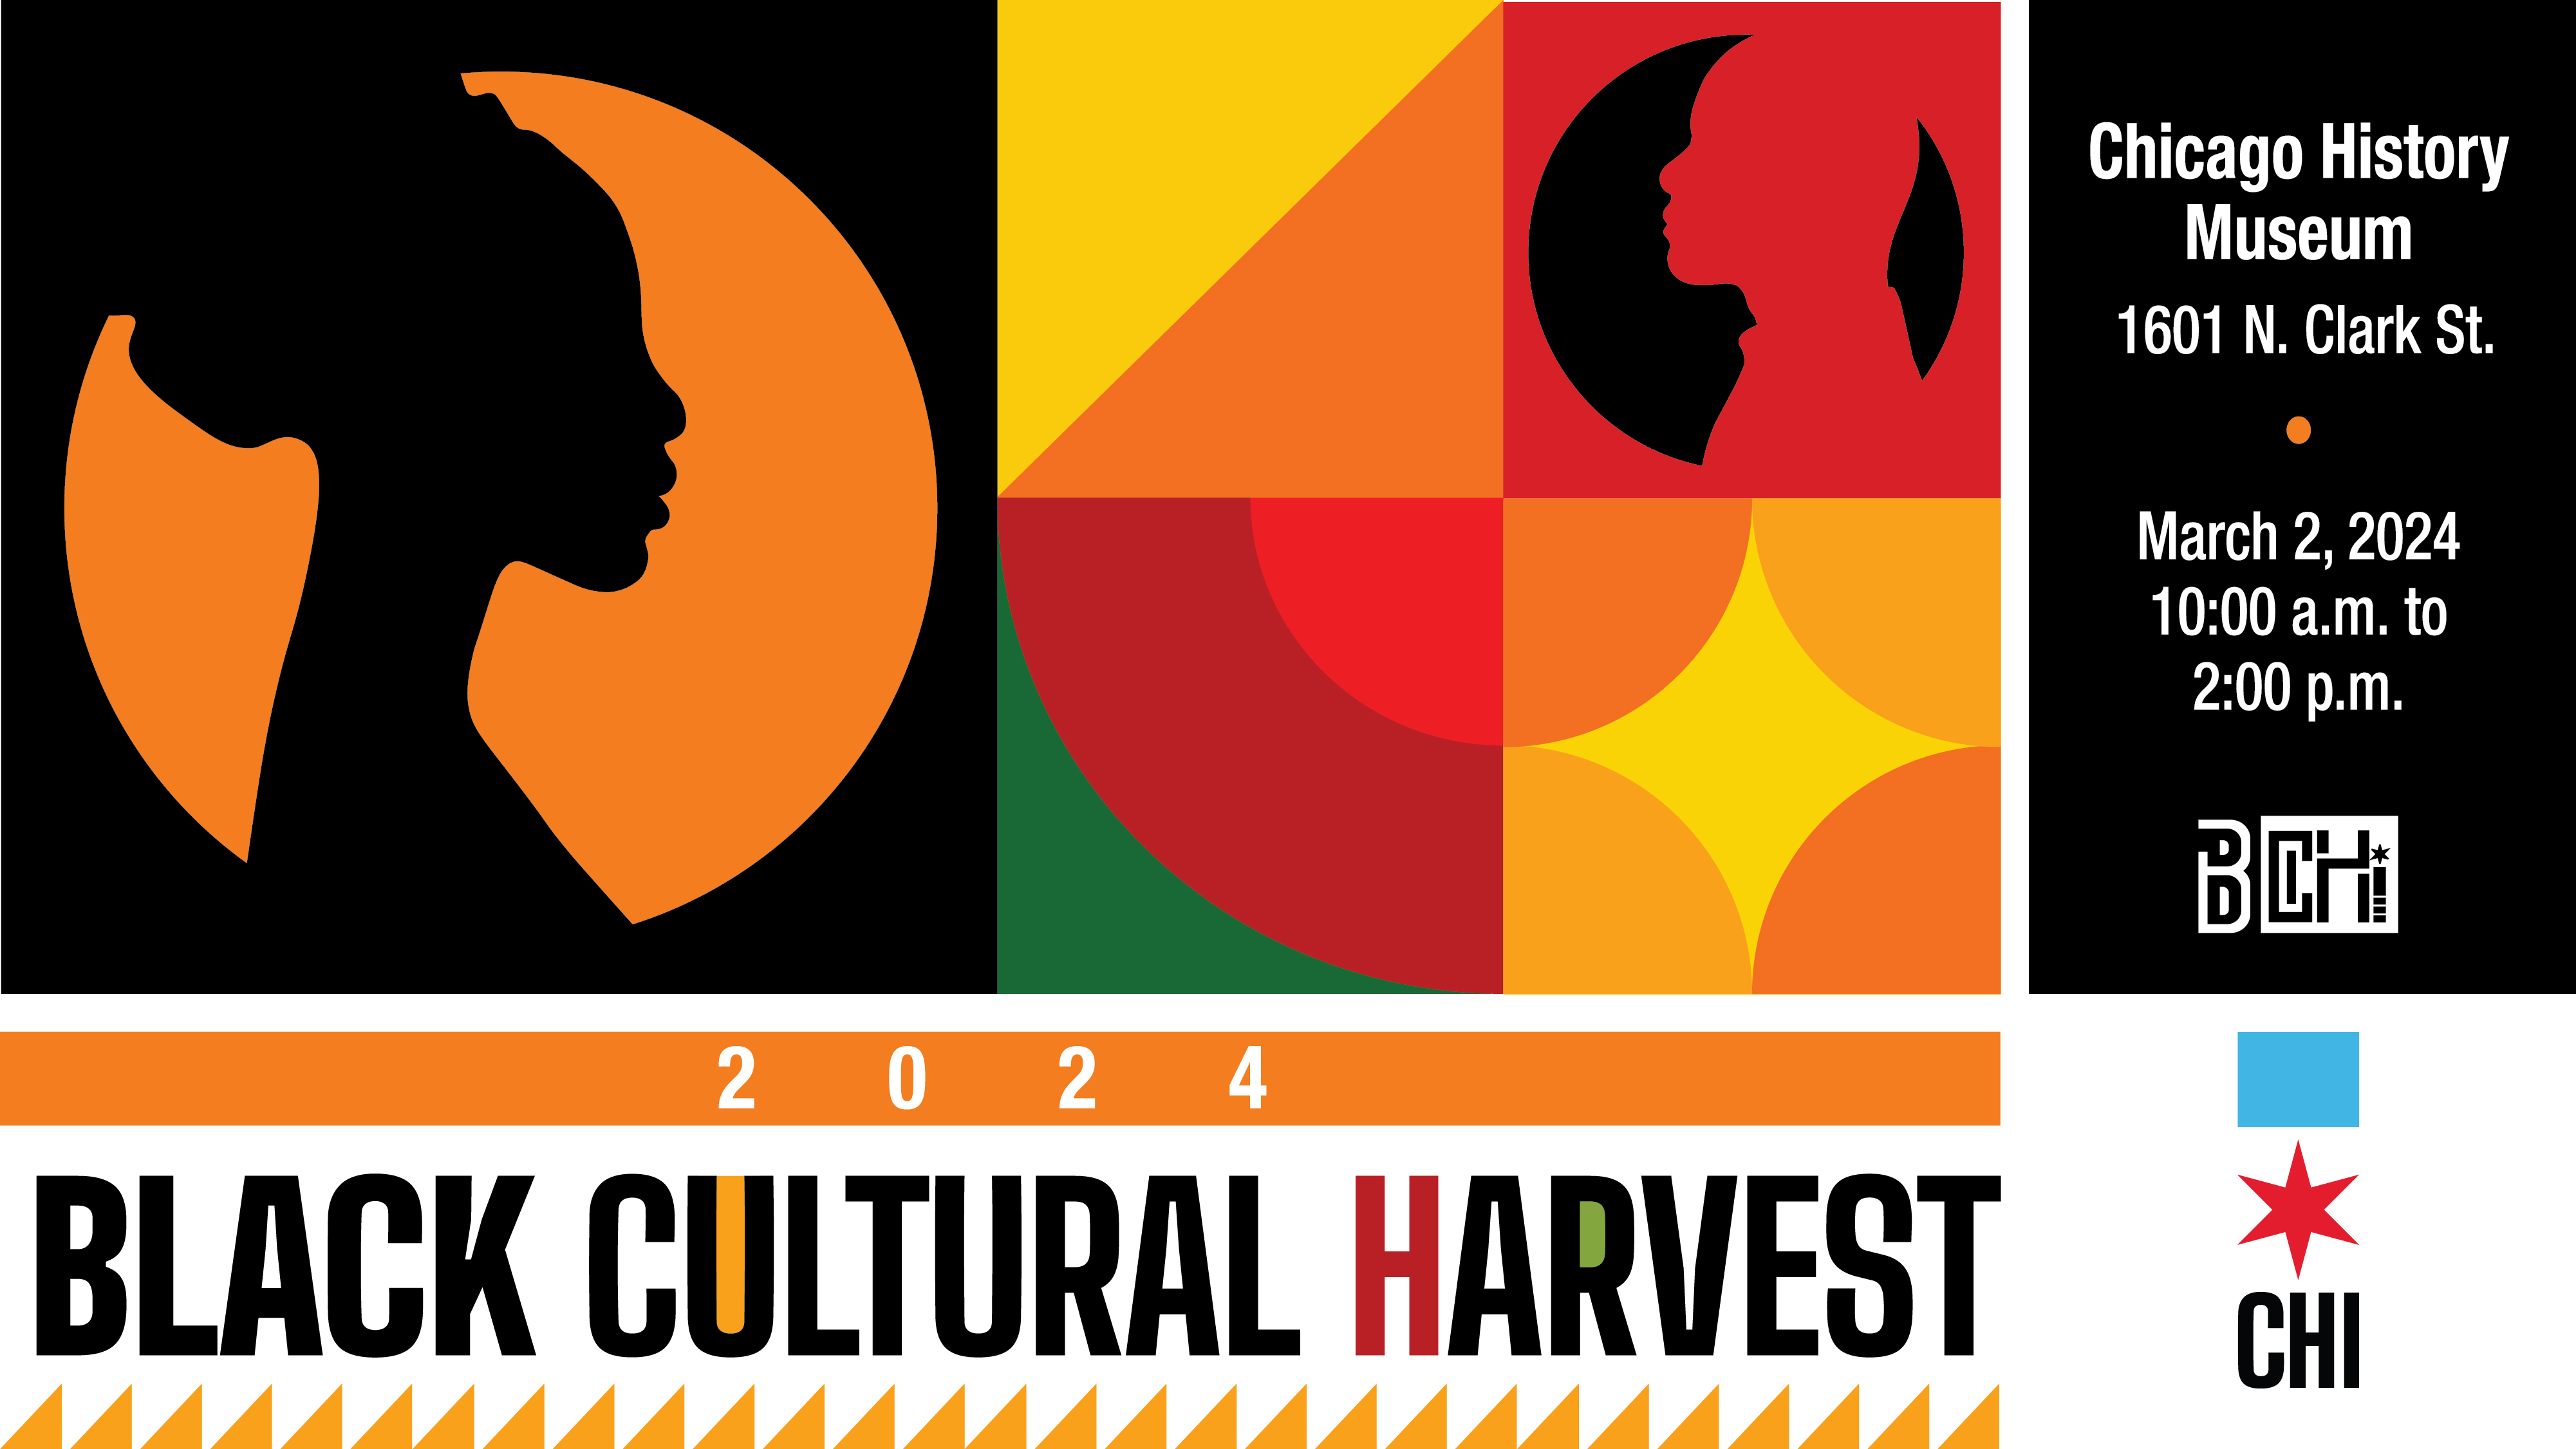 Black Cultural Harvest | March 2, 2024 at the Chicago History Museum, 1601 N. Clark St.